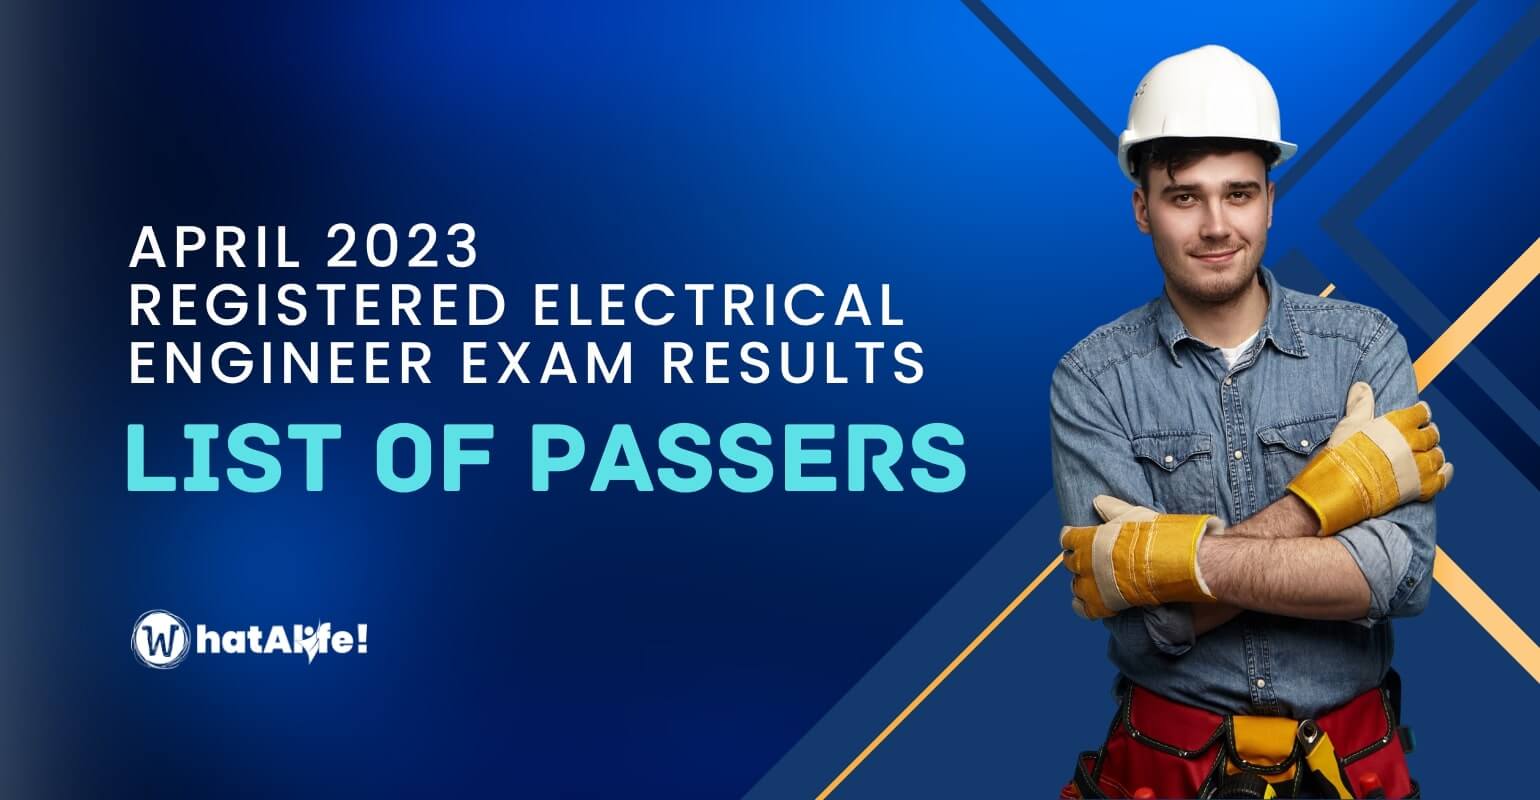 full list of passers a registered electrical engineer licensure exam results